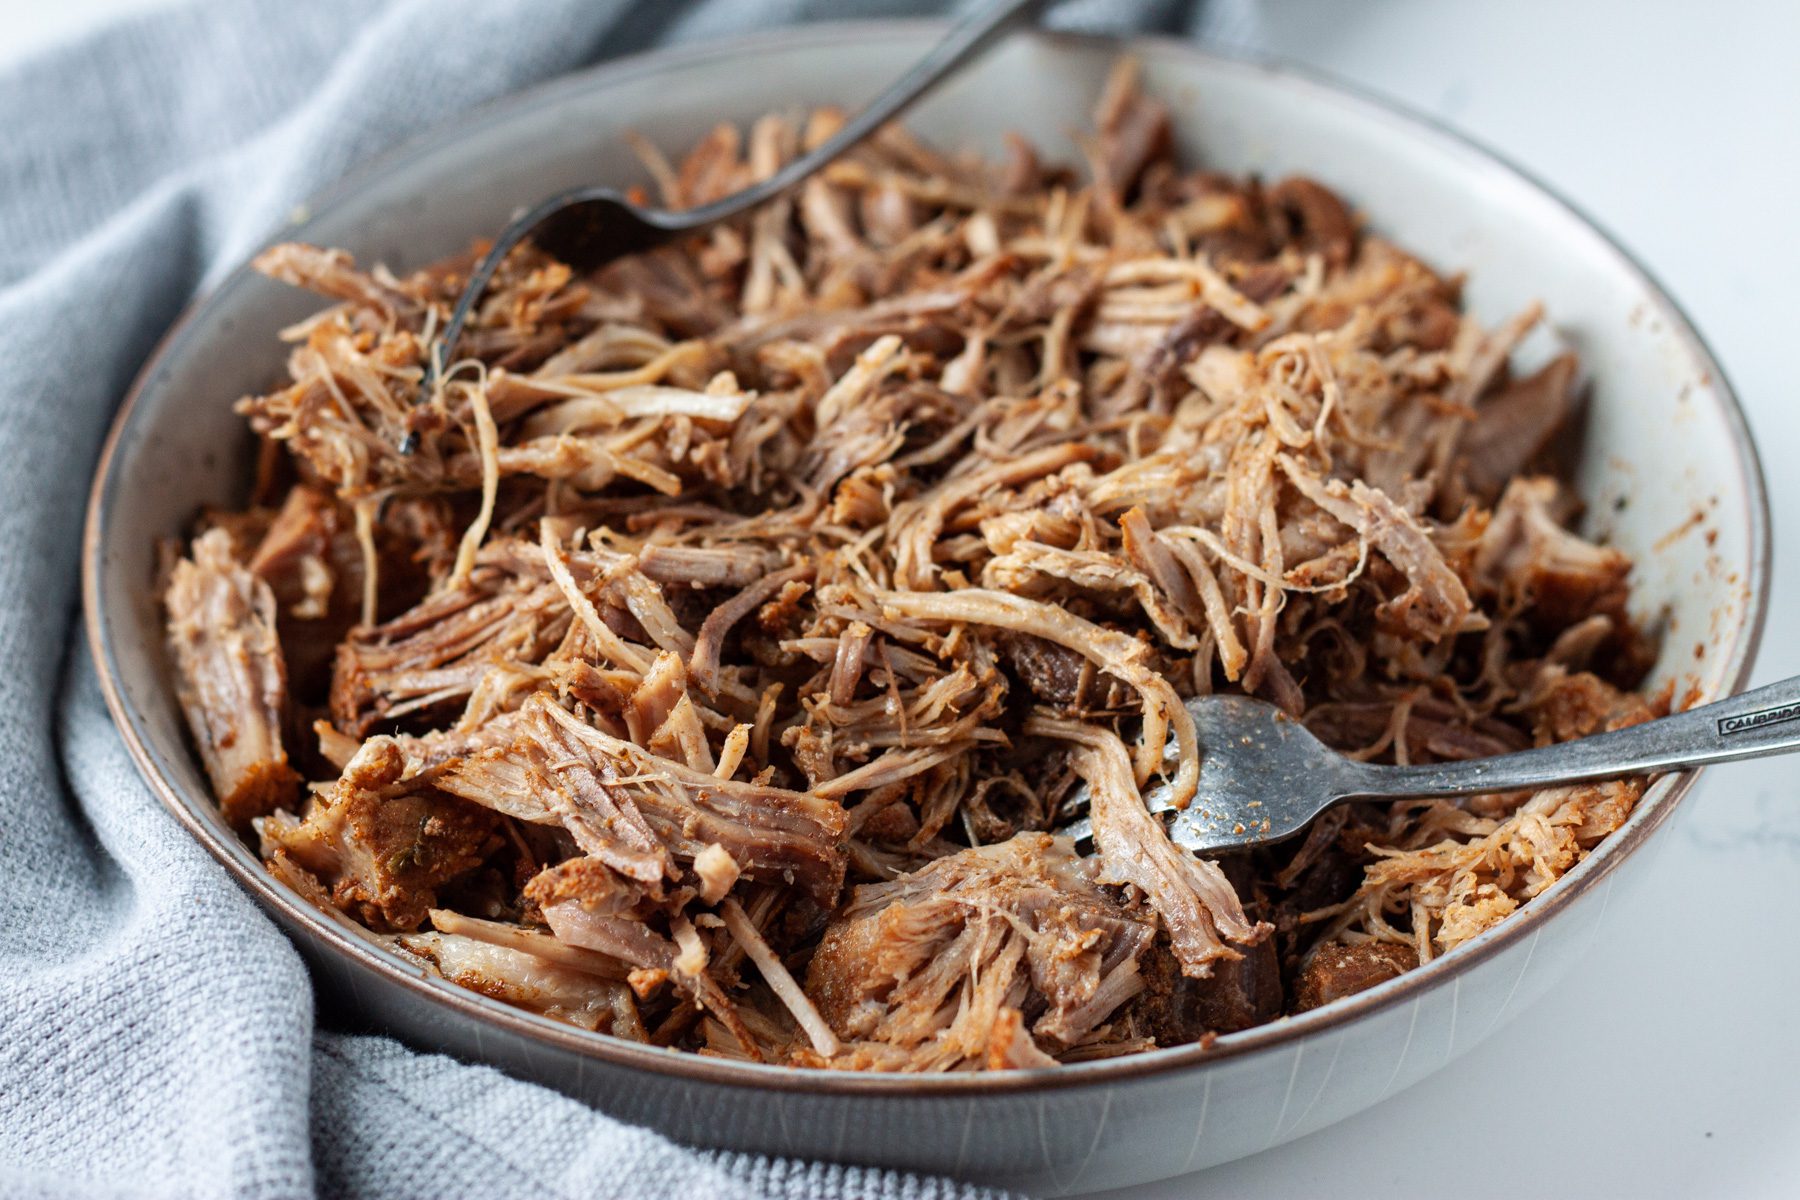 Pulled pork made in the Instant Pot